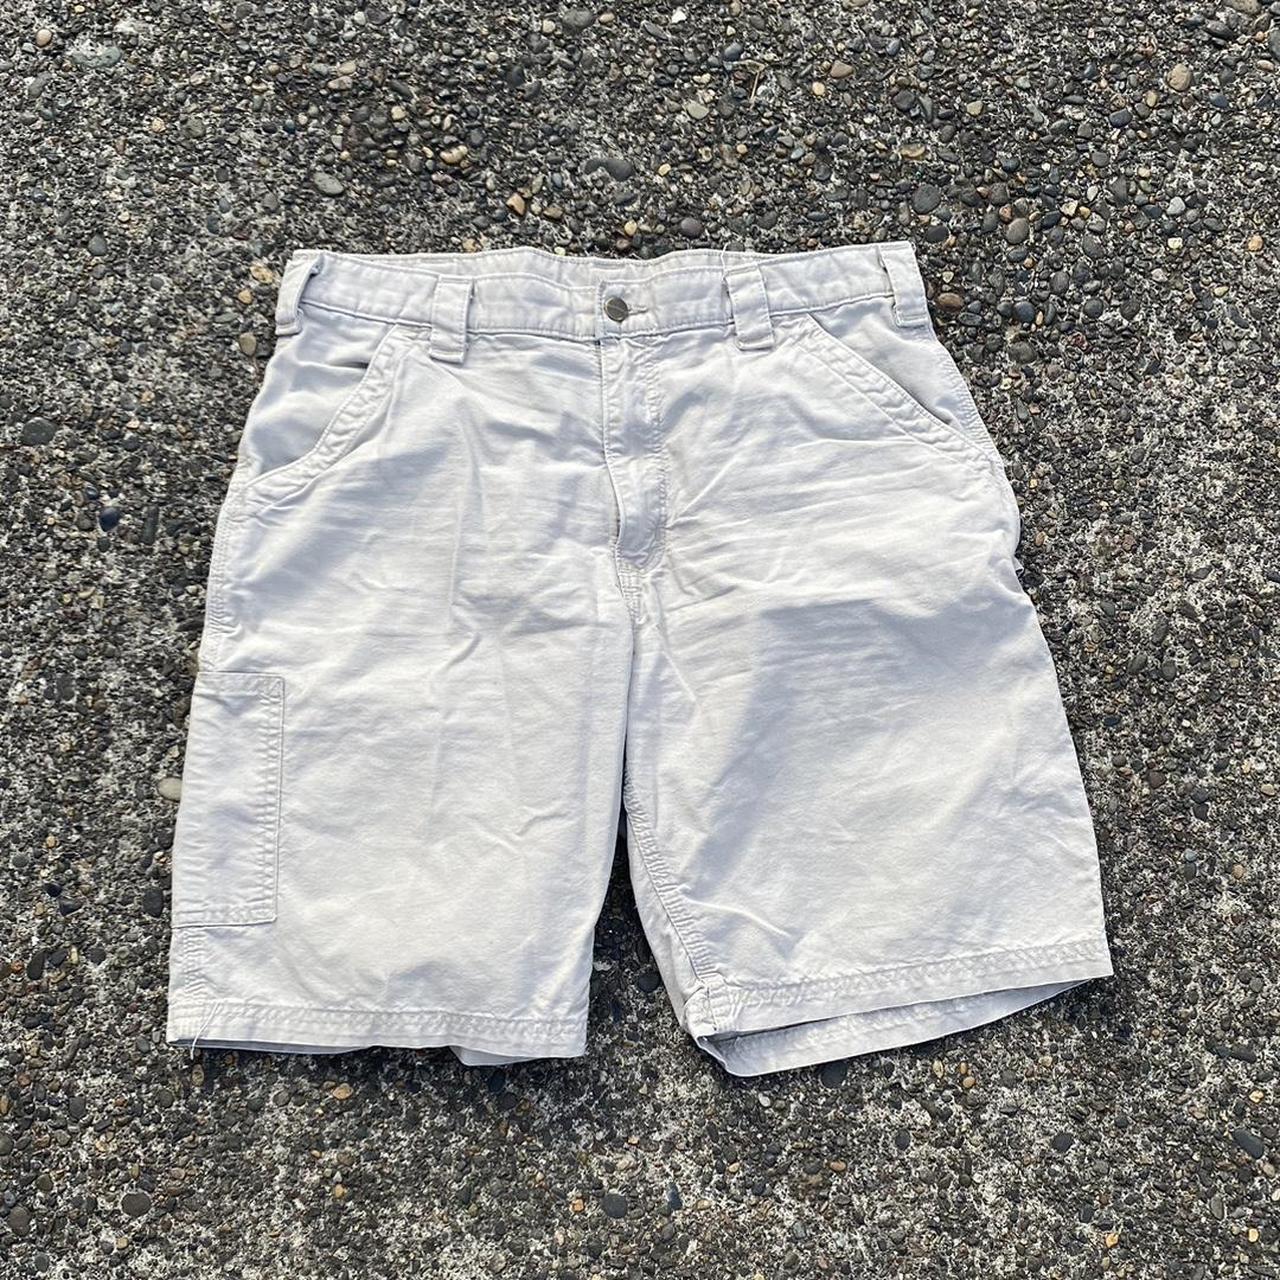 Carhartt Jorts Tan Size:36 Message with any questions - Depop